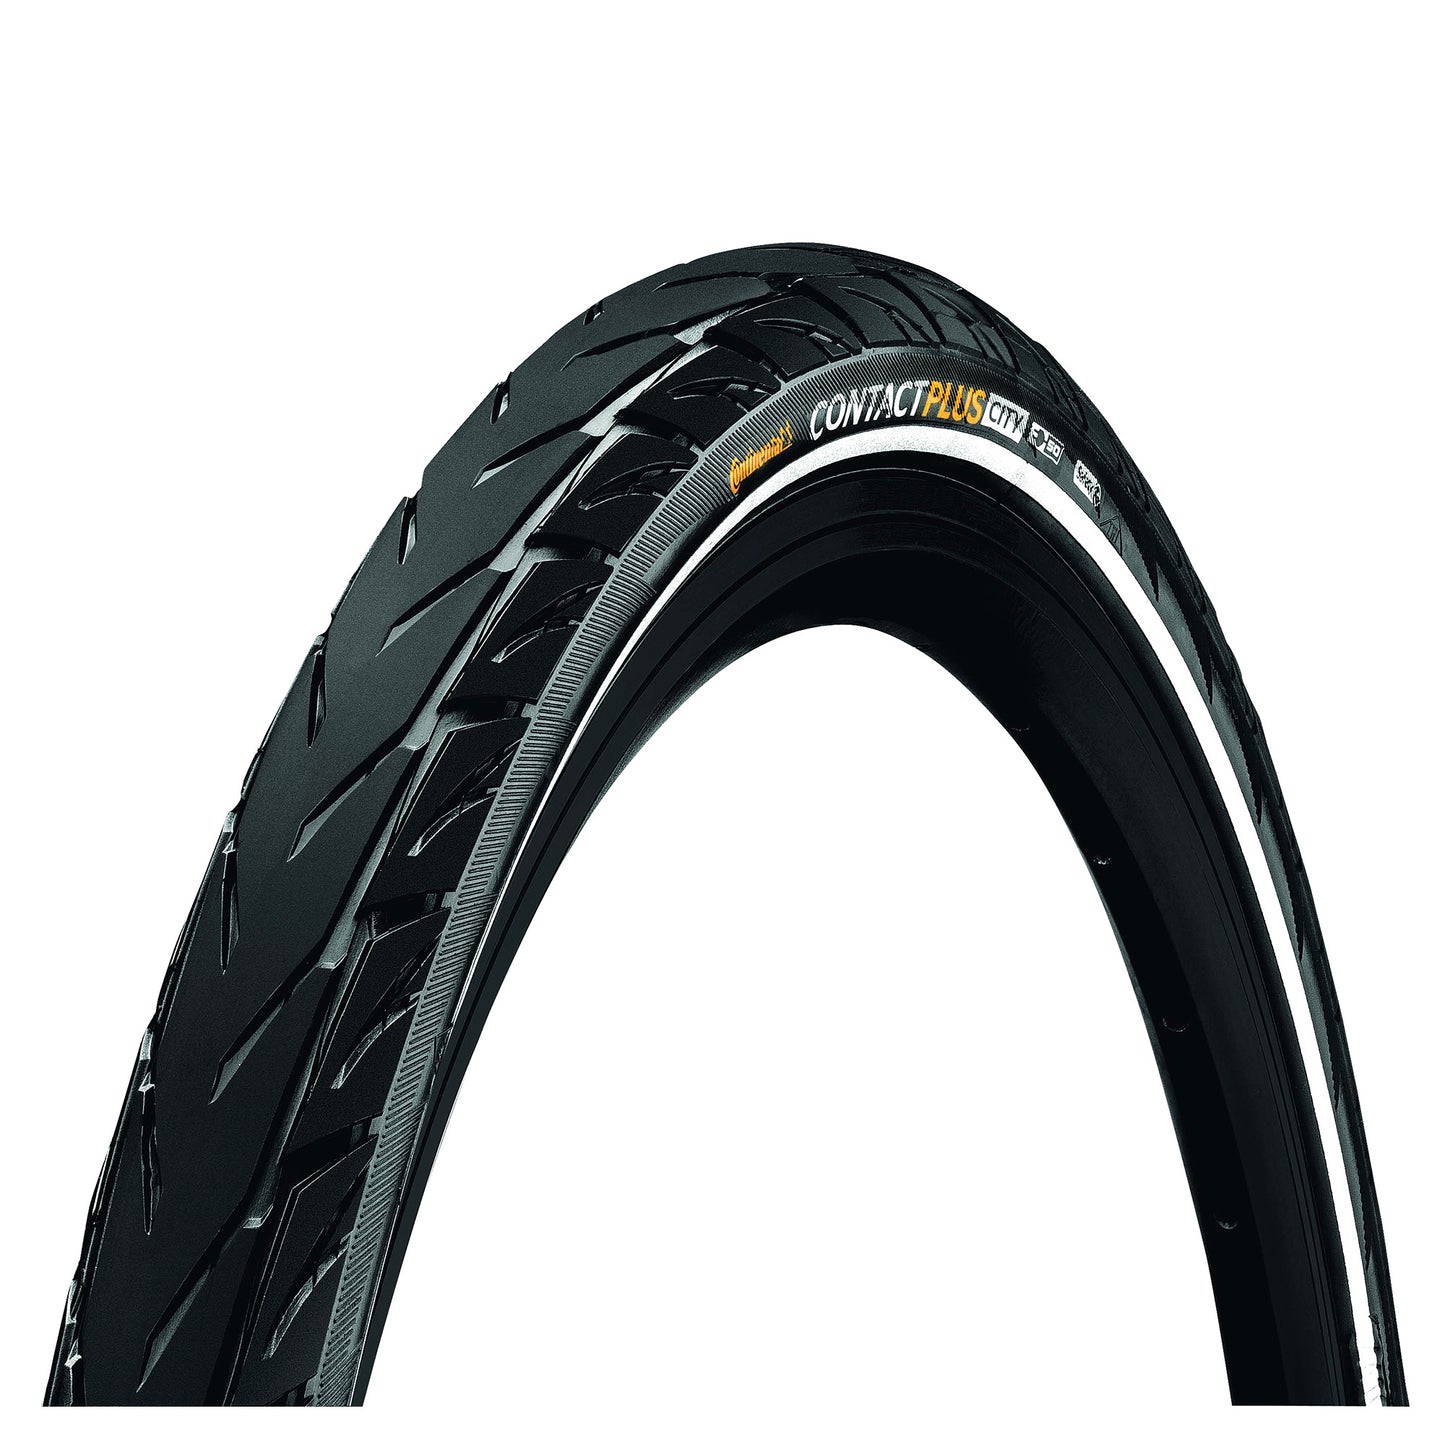 CONTINENTAL CONTACT PLUS CITY REFLEX TYRE - WIRE BEAD